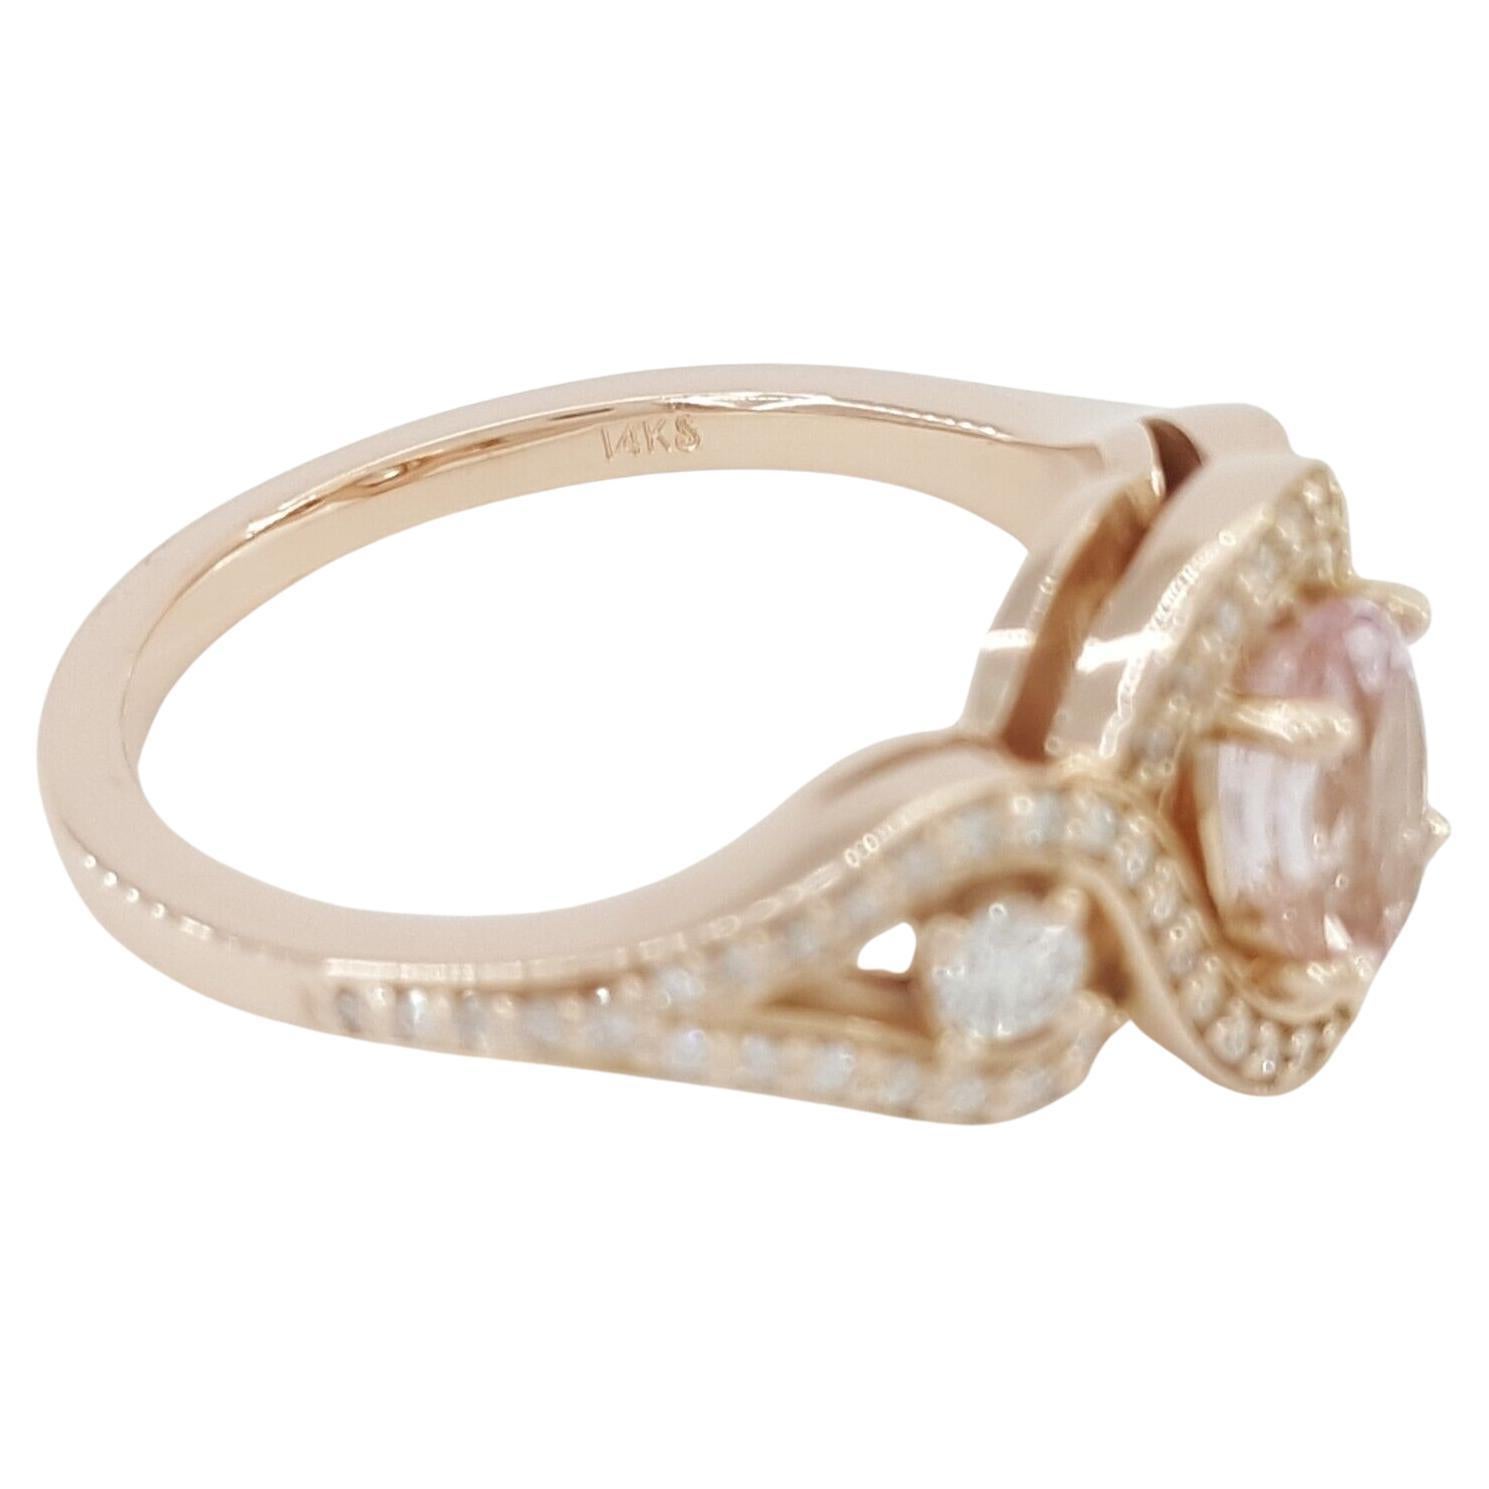 Introducing an exquisite engagement or statement ring, a symbol of elegance and timeless beauty. This piece is a stunning combination of a delicate pink morganite and dazzling diamonds set in a sophisticated design.

Key Details:
- The ring features